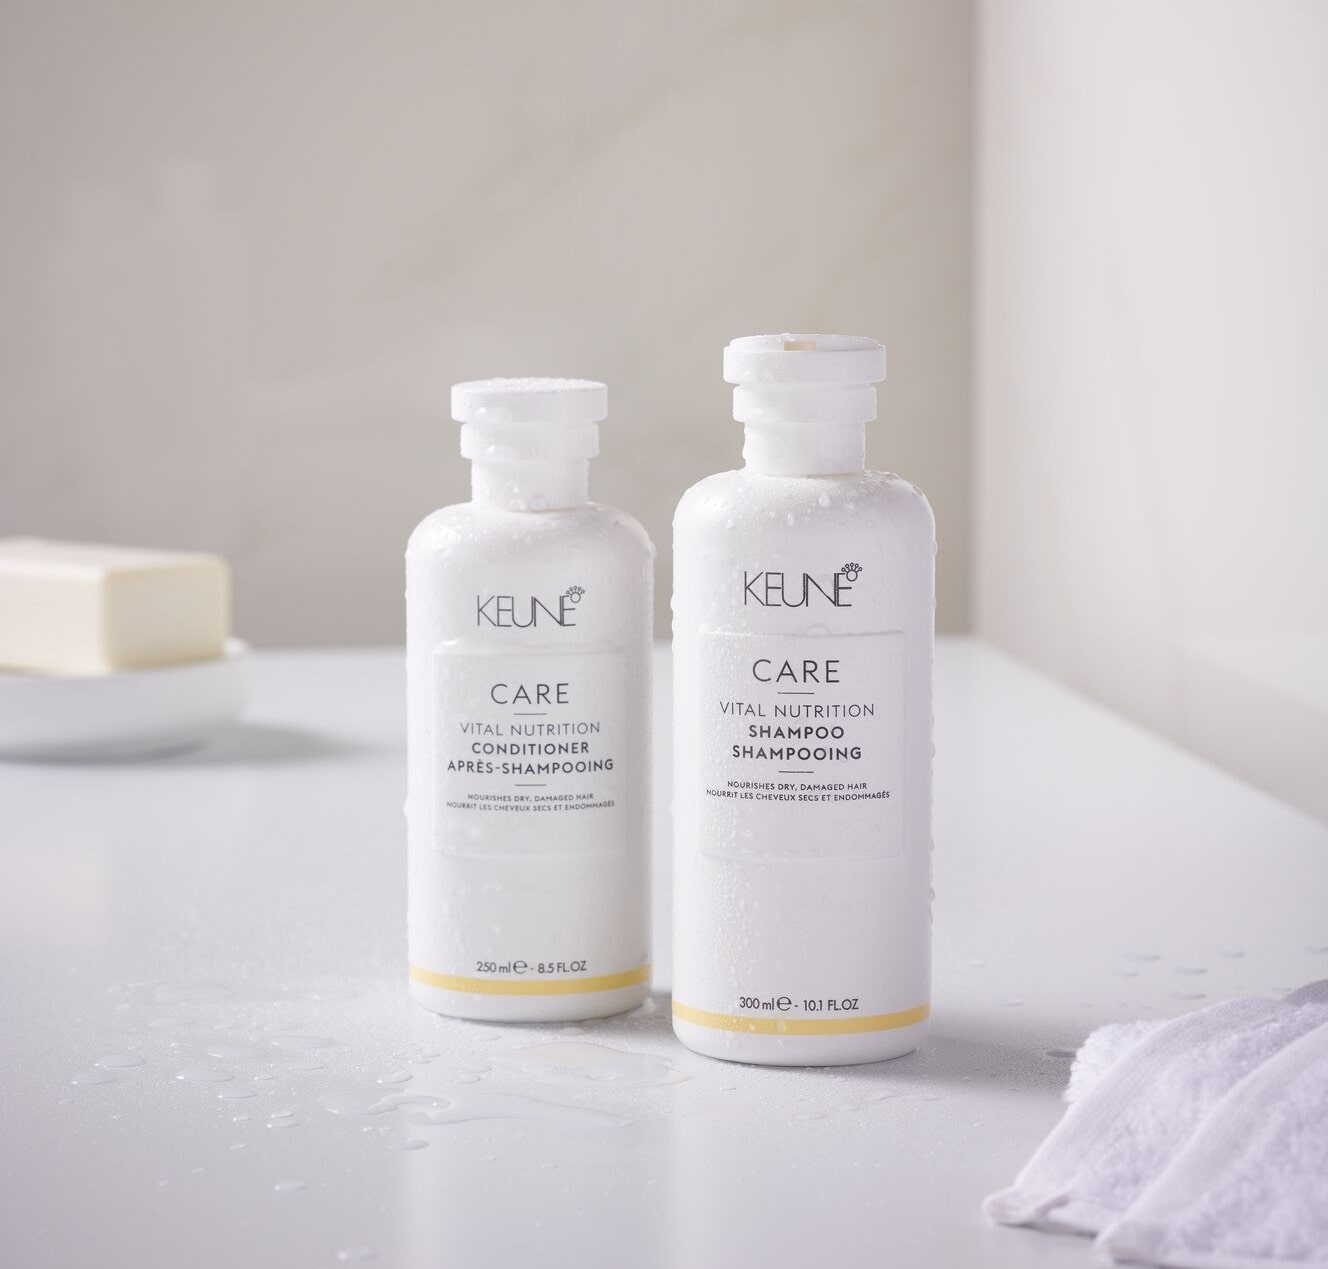 Keune Care: the professional hair care for you